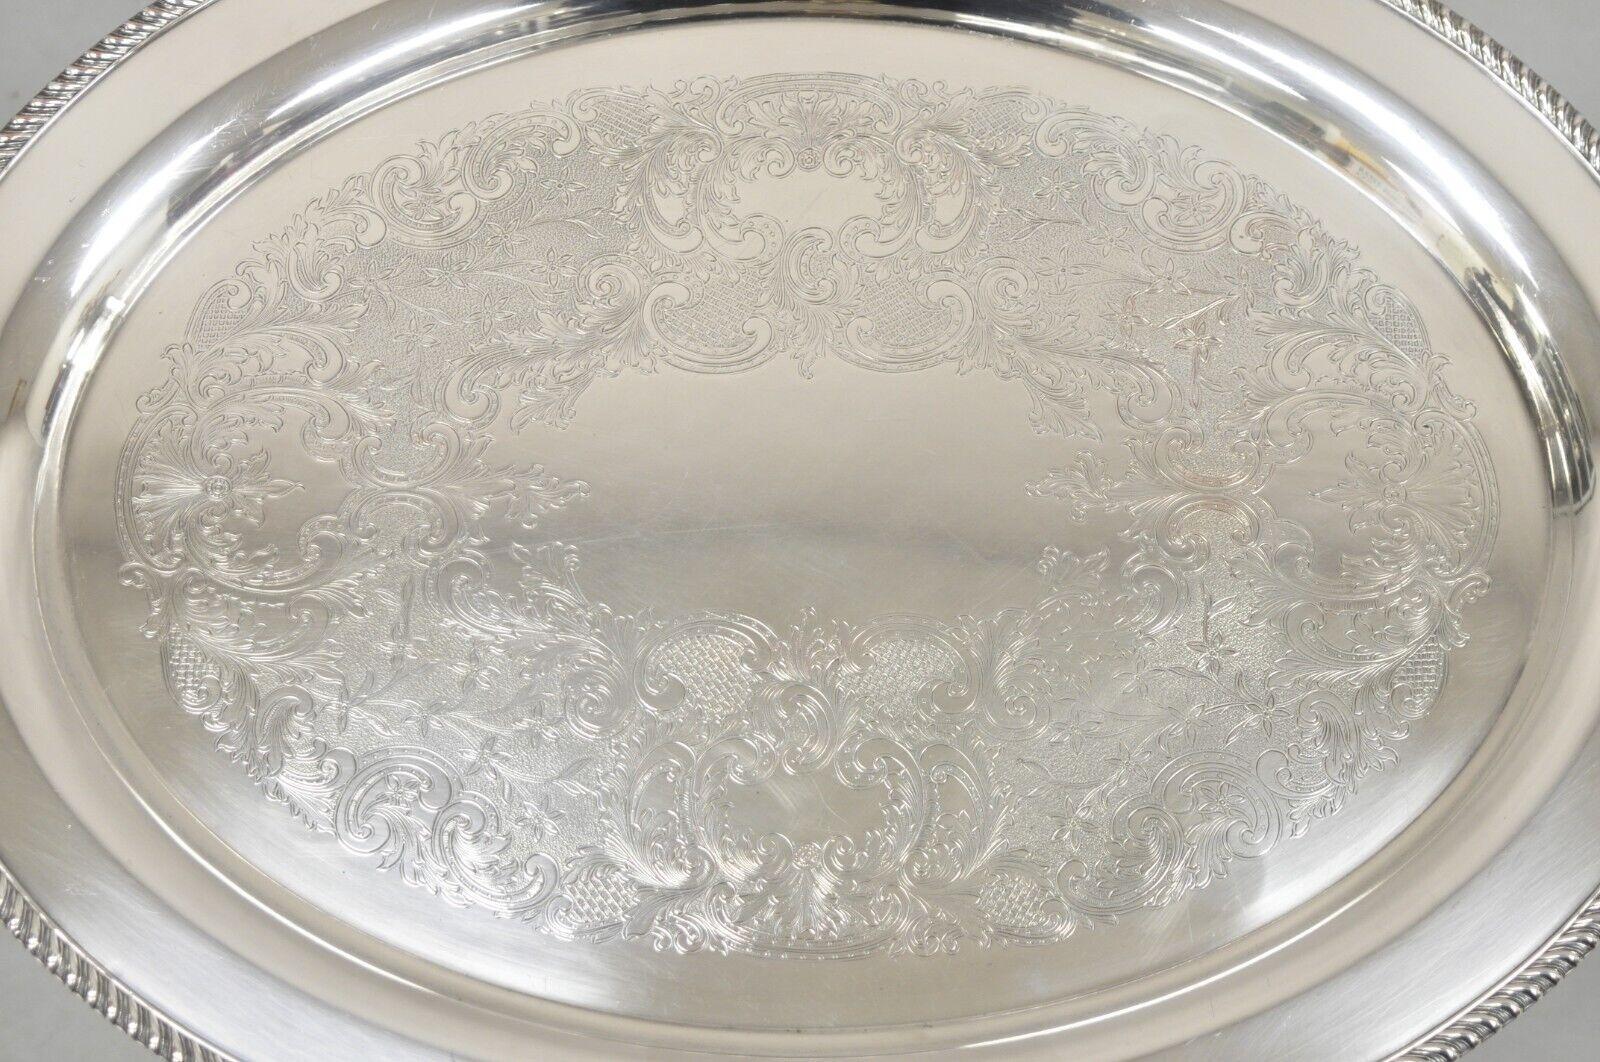 Vintage English Victorian Large Oval Silver Plated Serving Platter Tray by Victoria. CIRCA Anfang des 20. Jahrhunderts. Abmessungen:  2